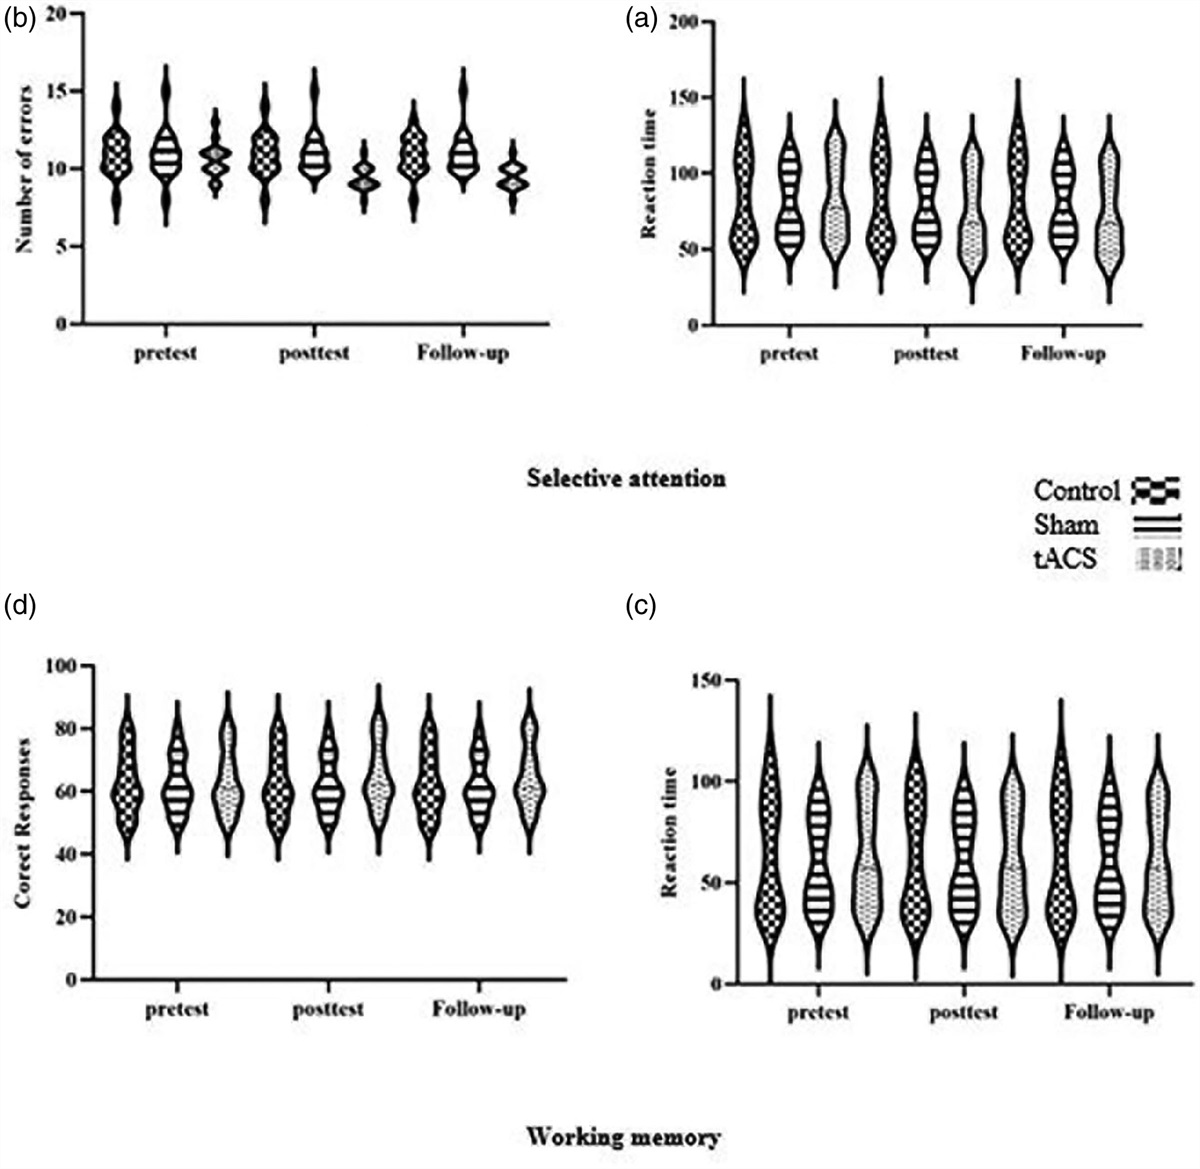 Impact of transcranial alternating current stimulation on working memory and selective attention in athletes with attention deficit hyperactivity disorder: randomized controlled trial